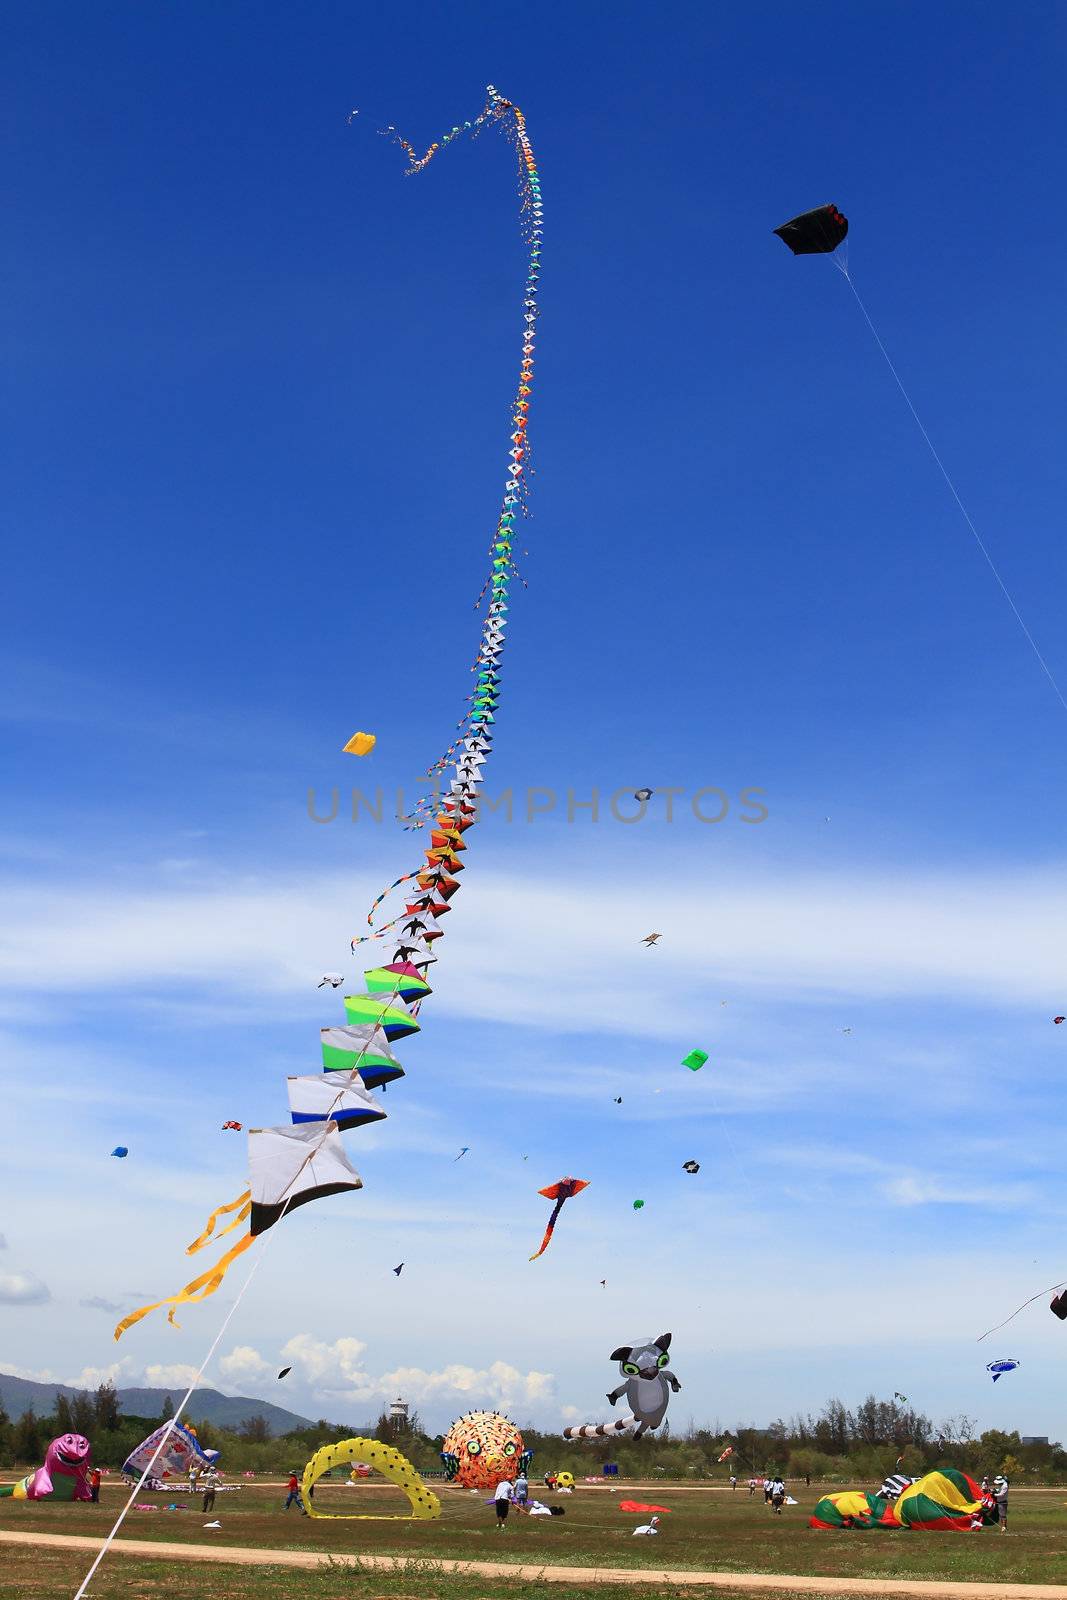 CHA-AM - MARCH 10: Colorful kites in the 12th Thailand Internati by rufous